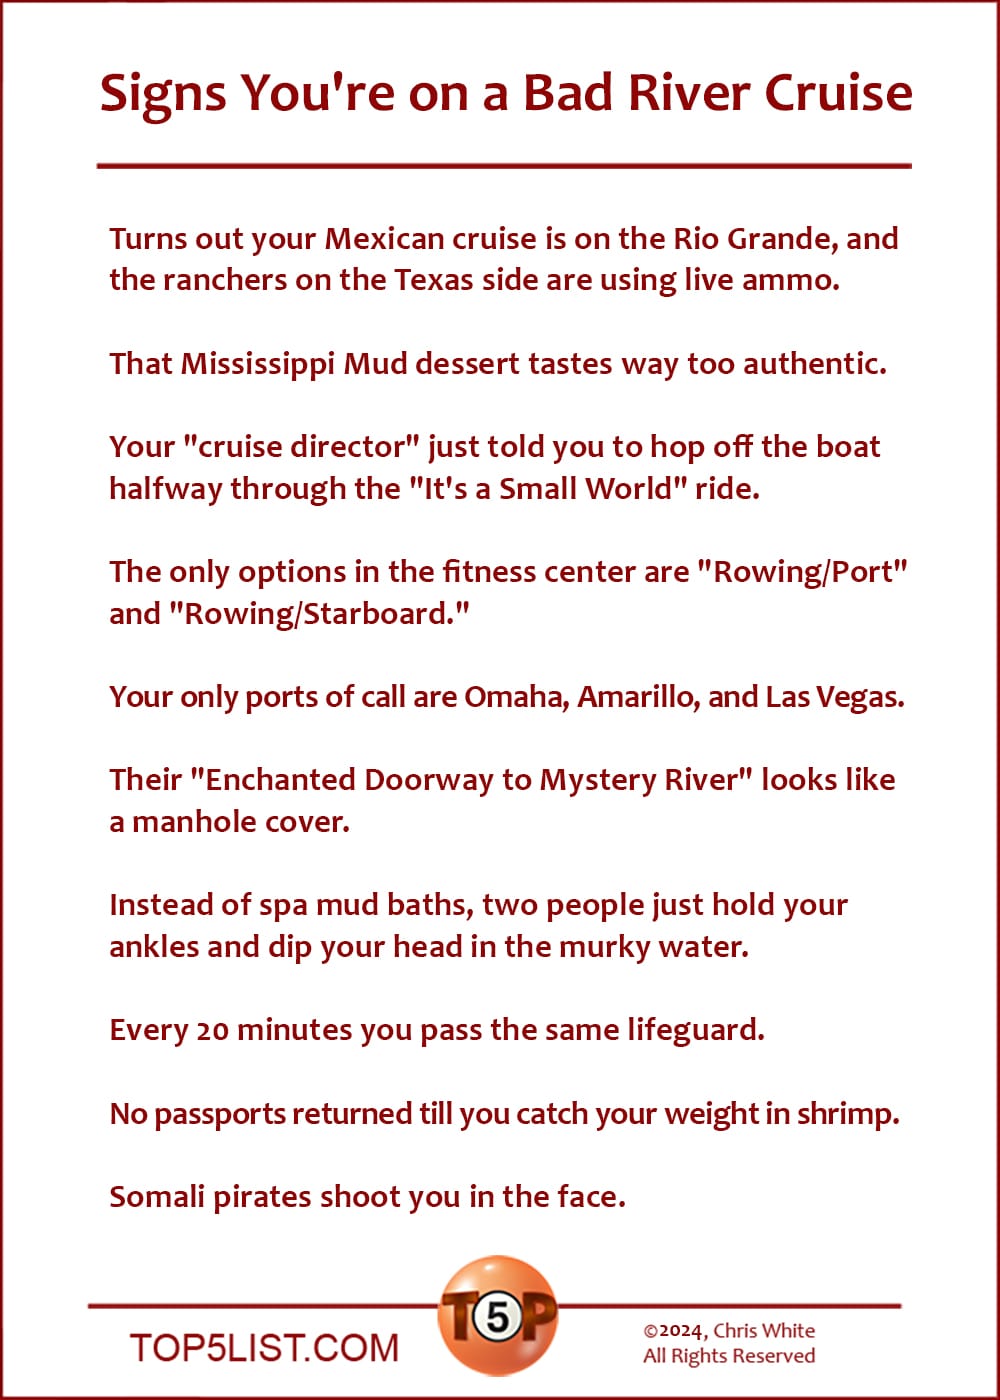 Signs You're on a Bad River Cruise  |   Turns out your Mexican cruise is on the Rio Grande, and the ranchers on the Texas side are using live ammo.  That Mississippi Mud dessert tastes way too authentic.  Your "cruise director" just told you to hop off the boat halfway through the "It's a Small World" ride.  The only options in the fitness center are "Rowing/Port" and "Rowing/Starboard."  Your only ports of call are Omaha, Amarillo, and Las Vegas.  Their "Enchanted Doorway to Mystery River" looks like a manhole cover.  Instead of spa mud baths, two people just hold your ankles and dip your head in the murky water.  Every 20 minutes you pass the same lifeguard.  No passports returned till you catch your weight in shrimp.  Somali pirates shoot you in the face.